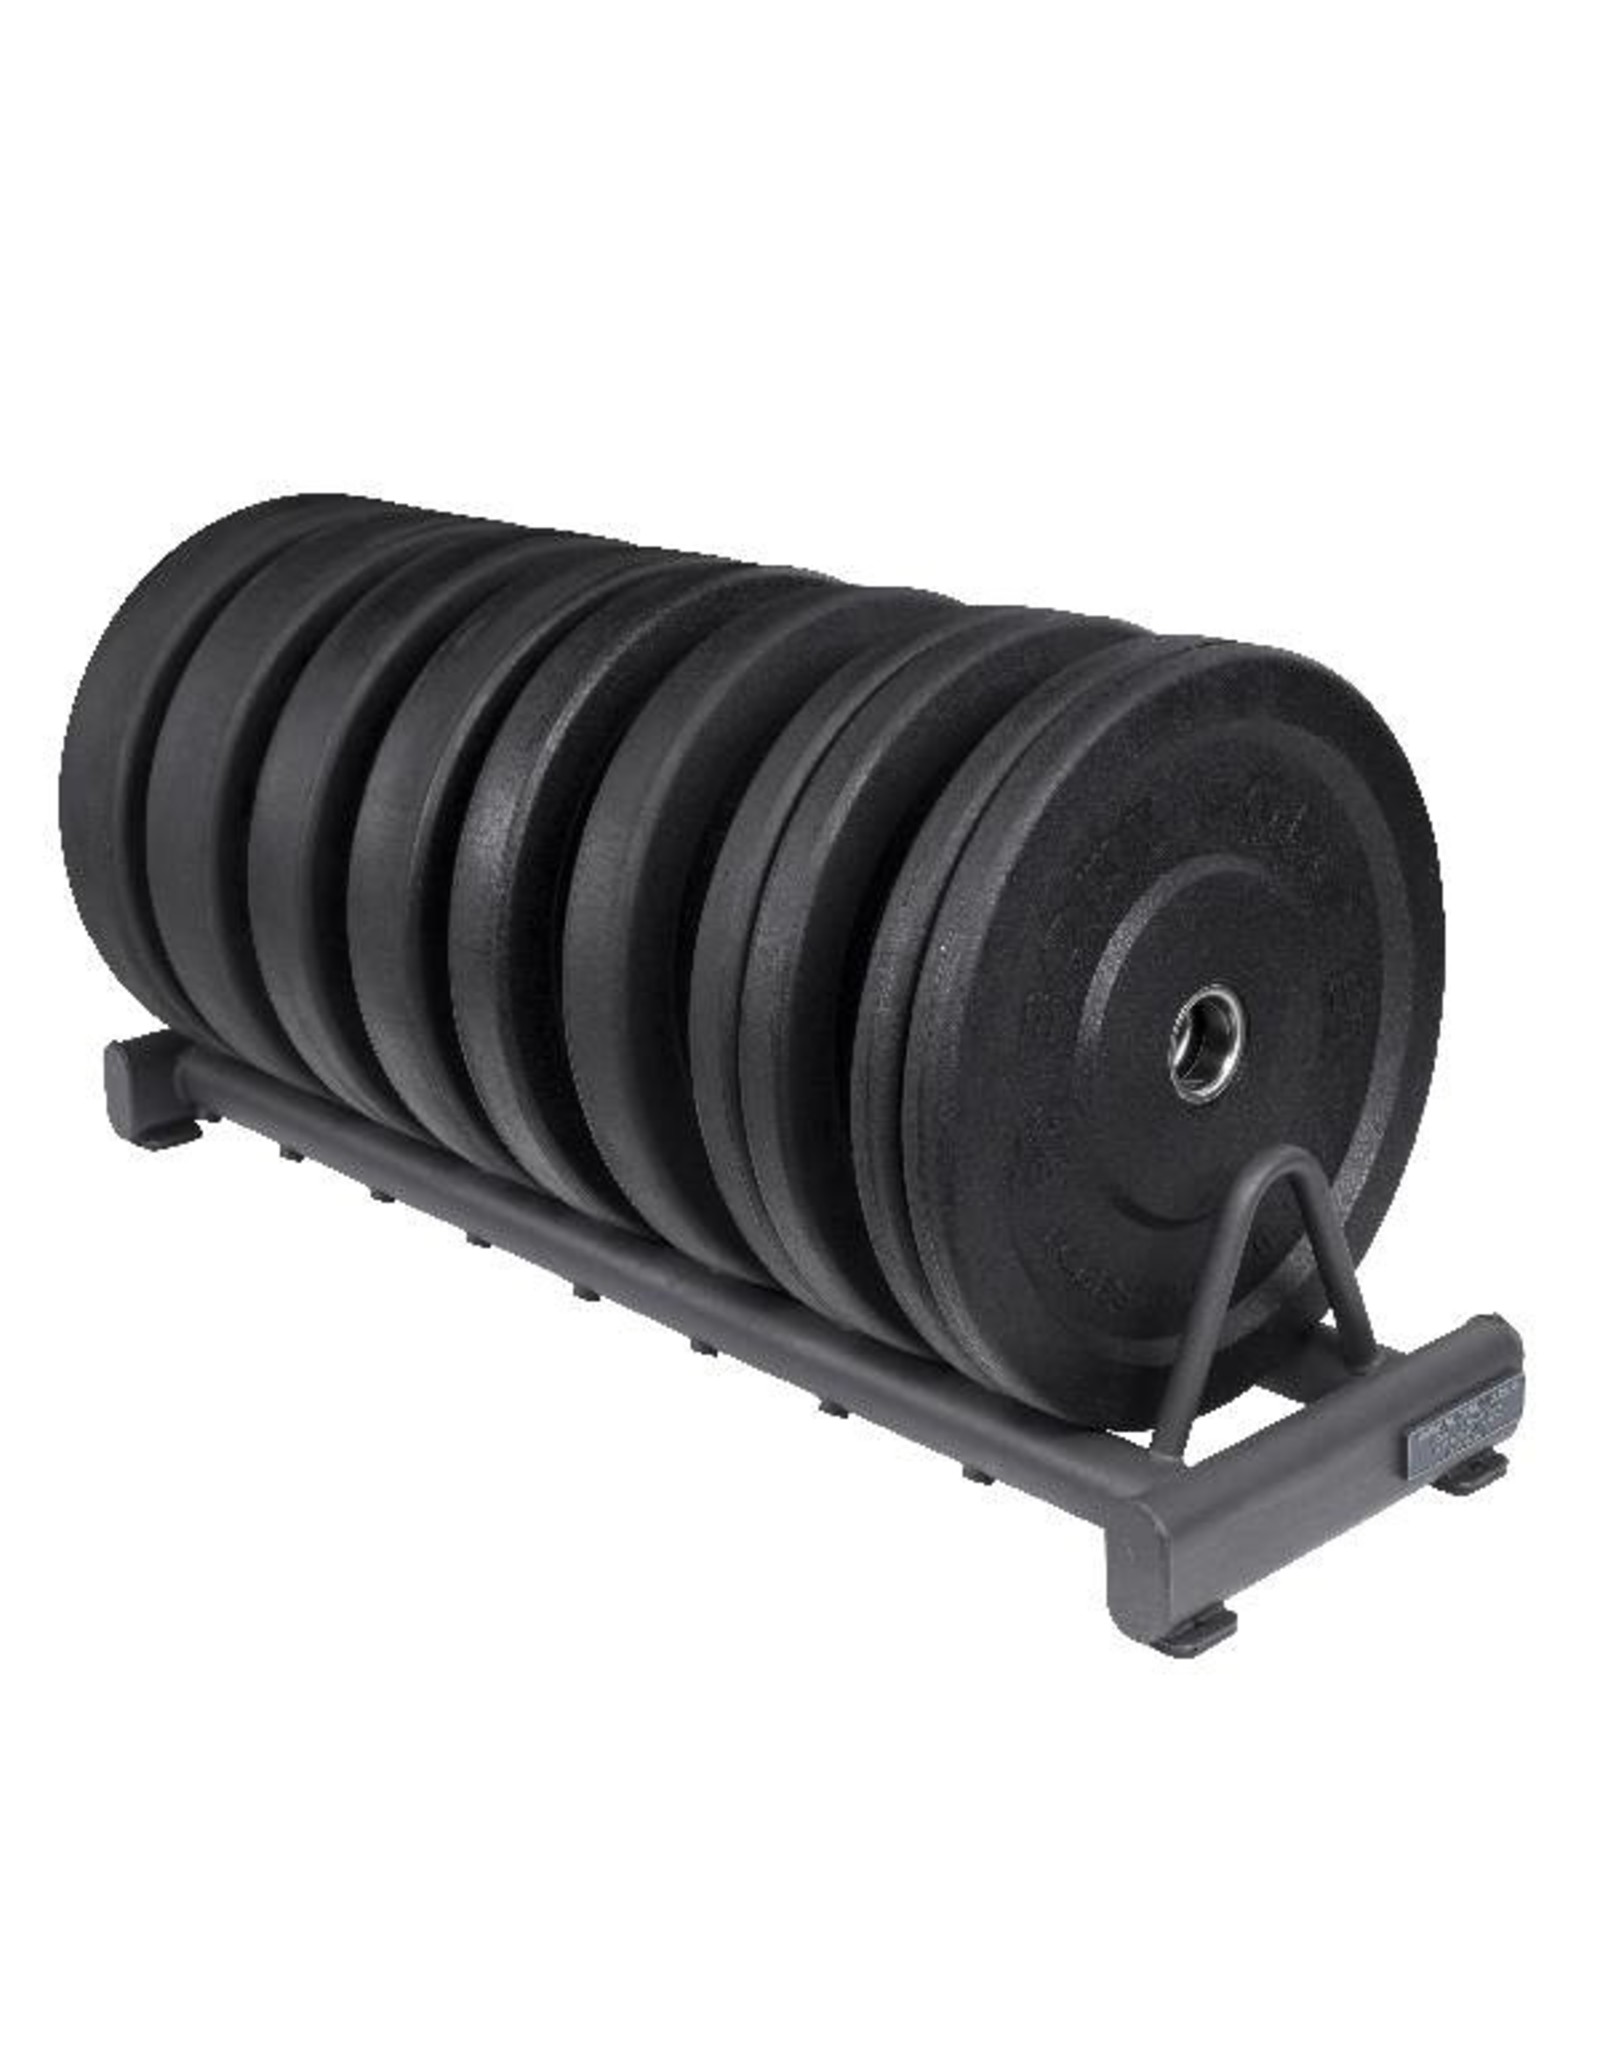 Body-Solid Body-Solid Rubber Bumper Plate Rack GBPR10